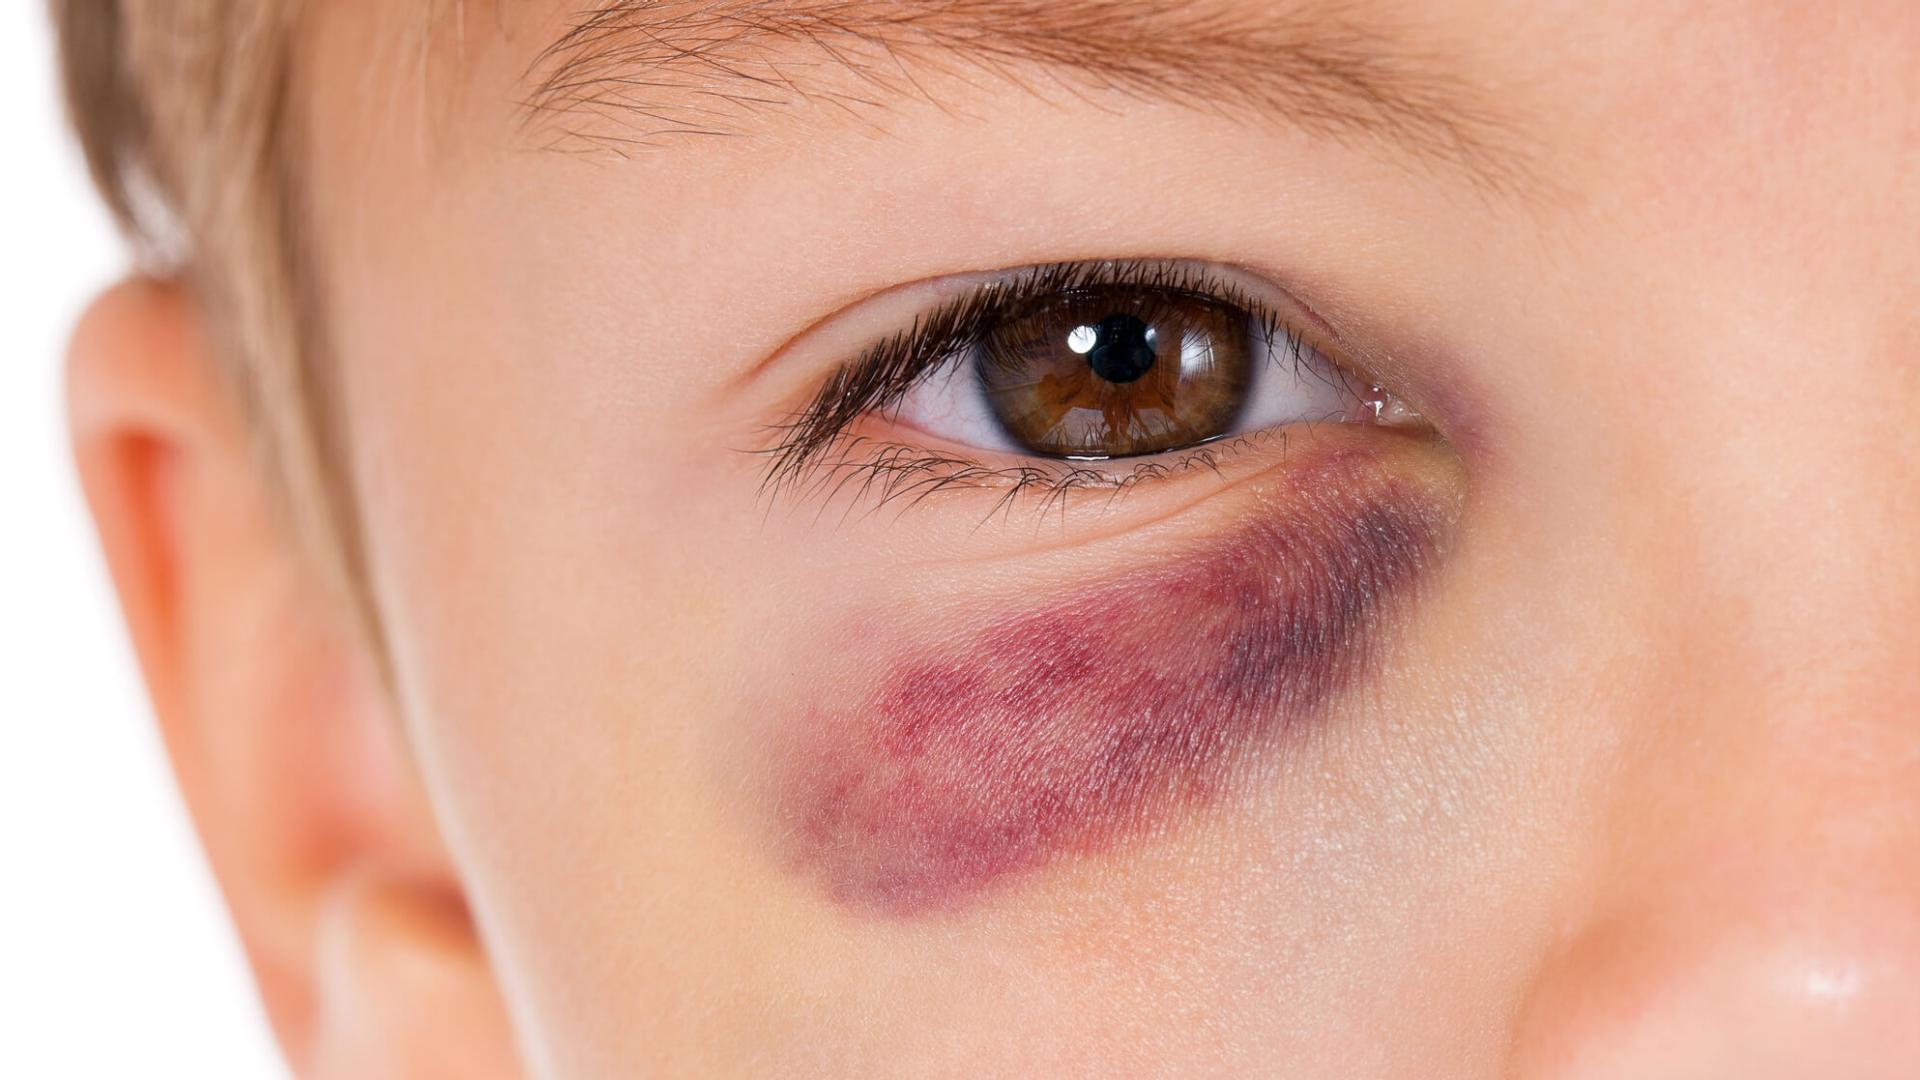 What is a black eye, how long does it last, and what causes it?